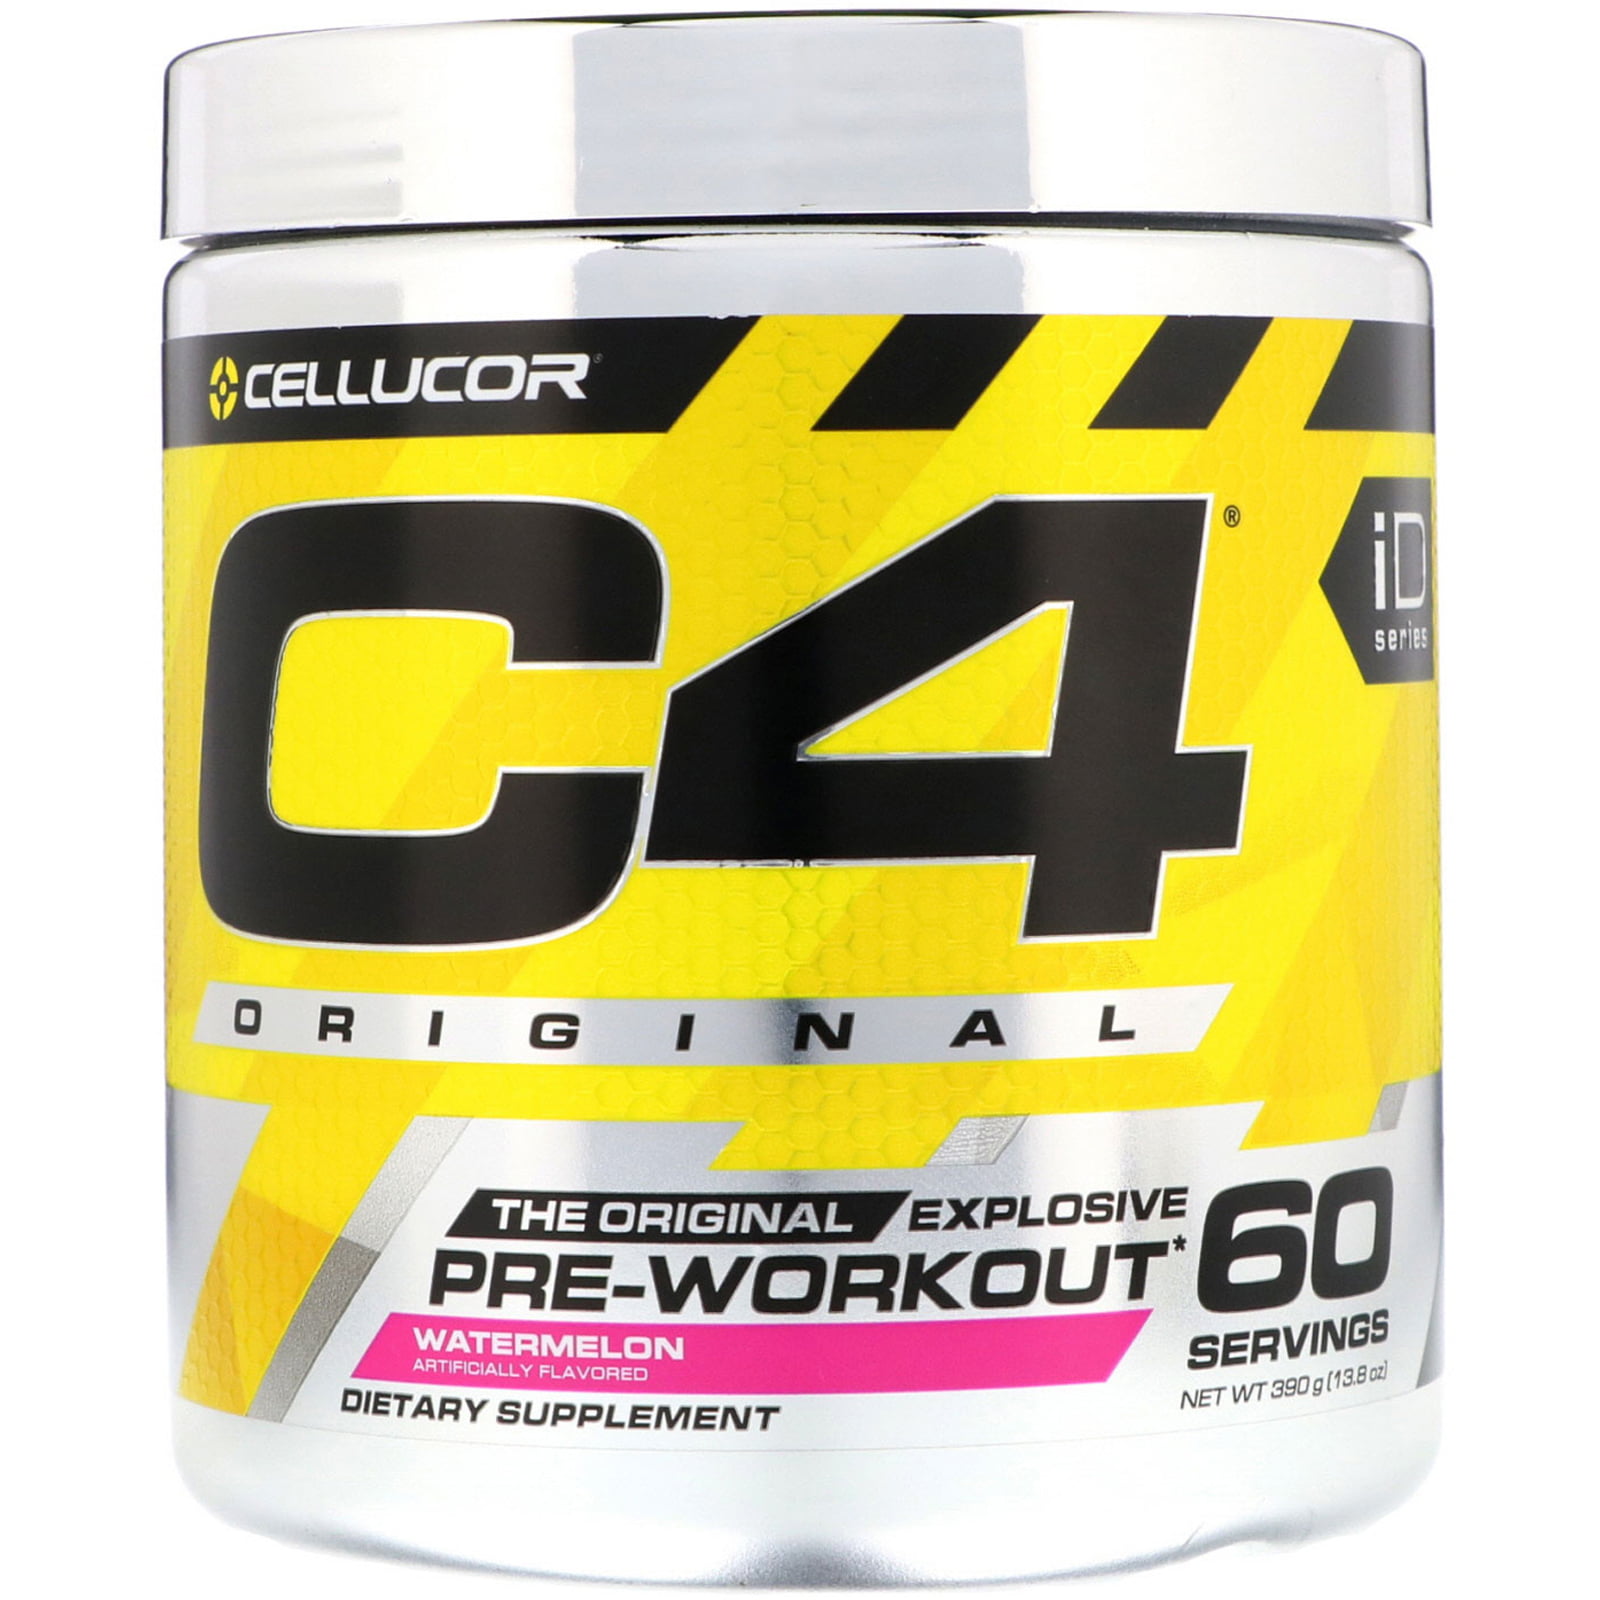 6 Day C4 pre workout for push your ABS